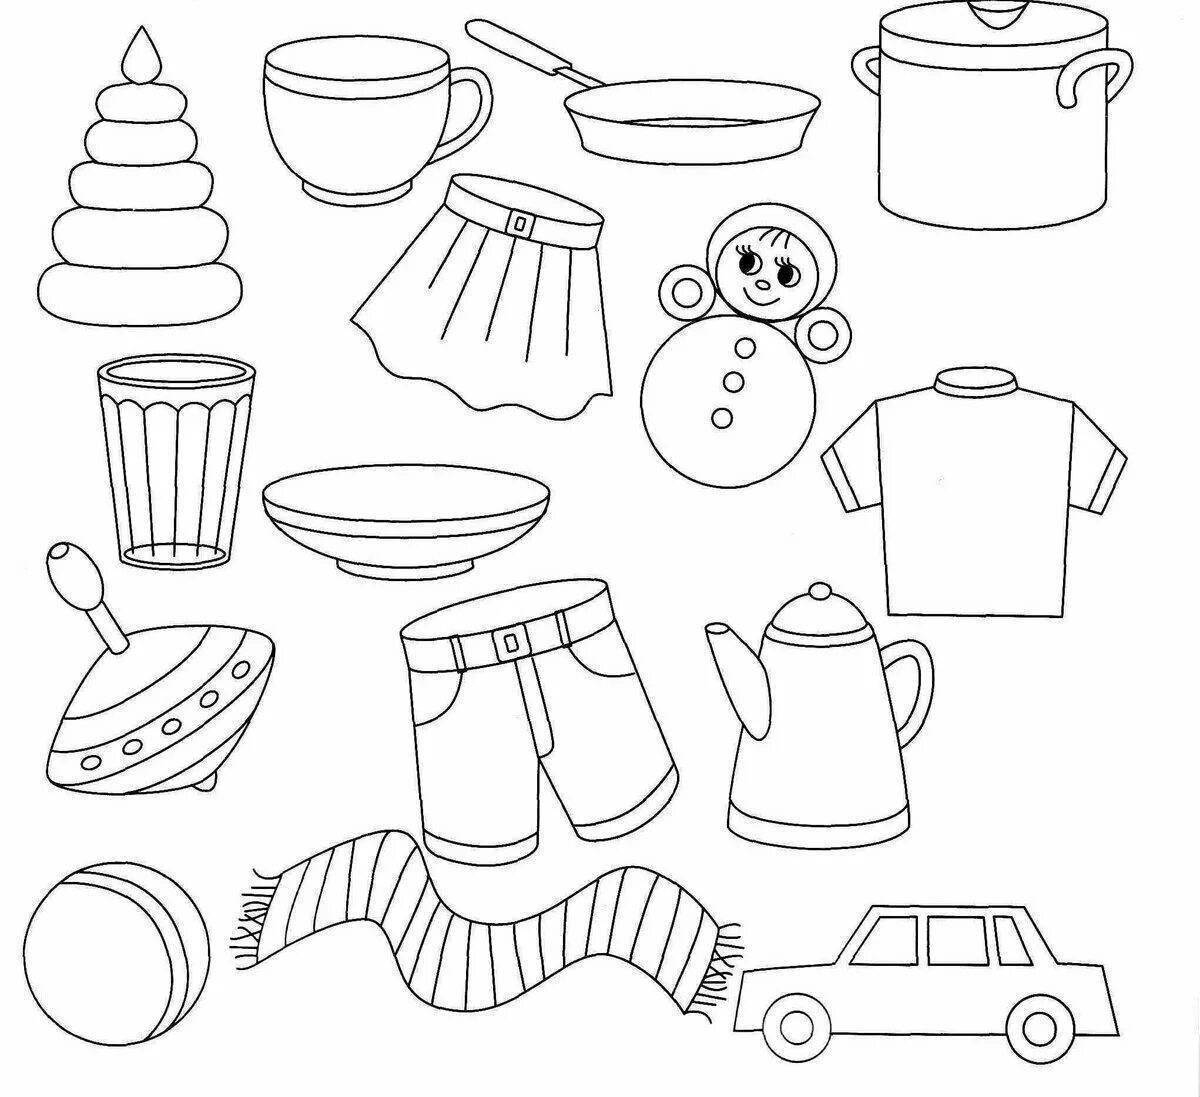 Colorful coloring pages for little philosophers